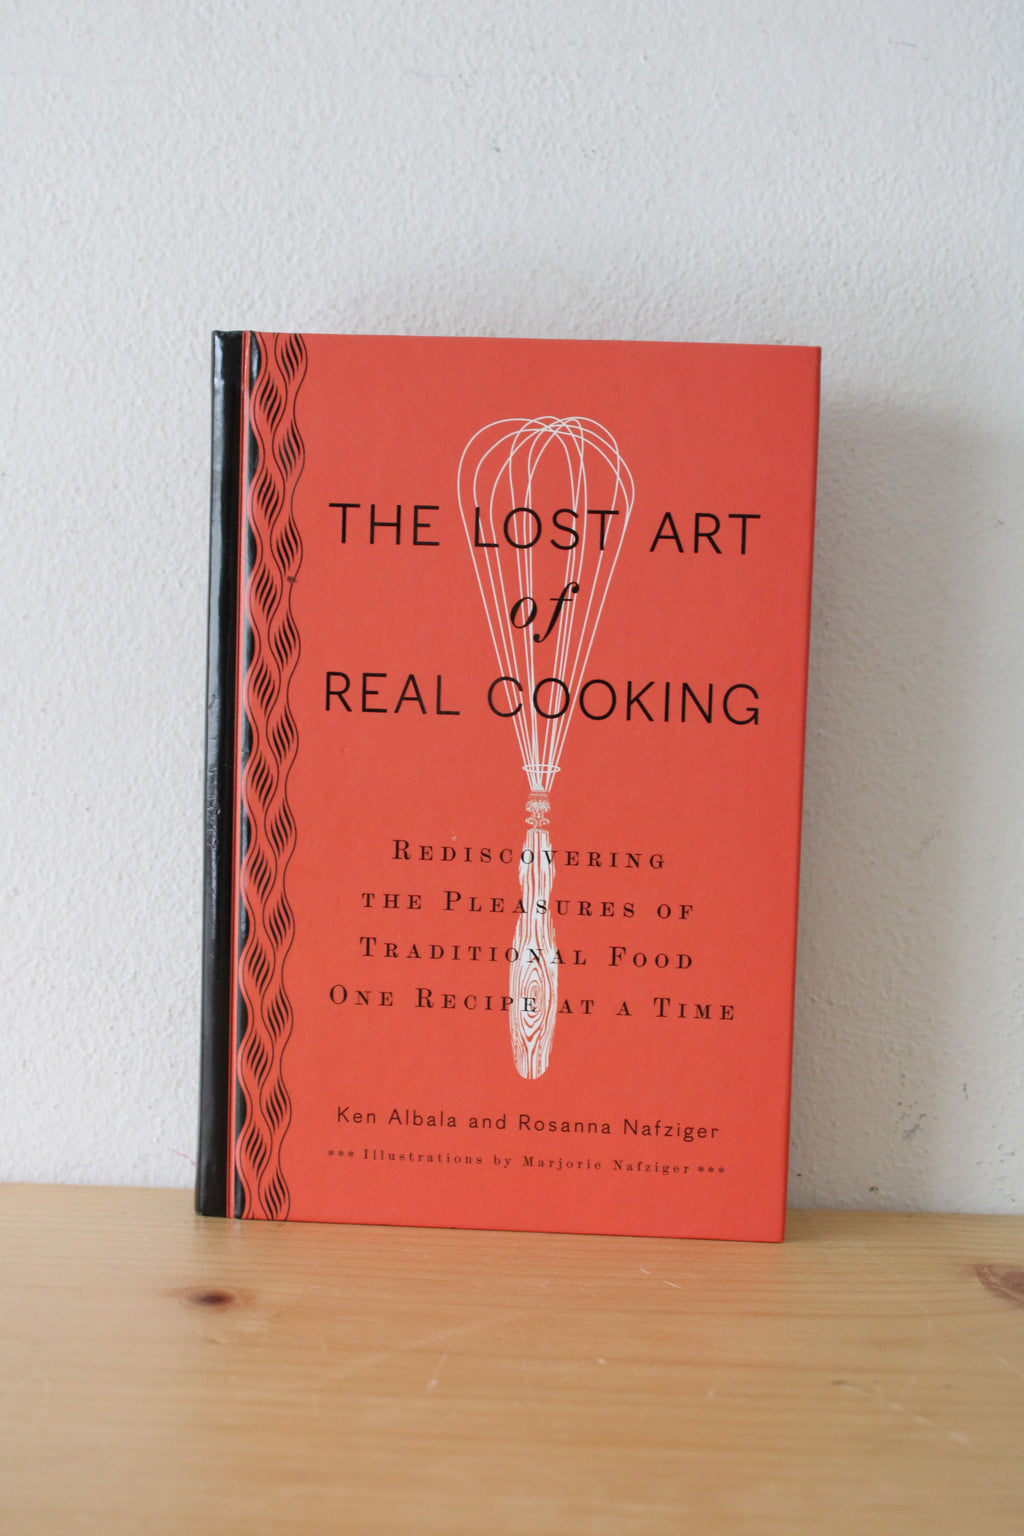 The Lost Art Of Real Cooking: Rediscovering The Pleasures Of Traditional Food One Recipe At A Time. By Ken Albala And Rosanna Nafziger